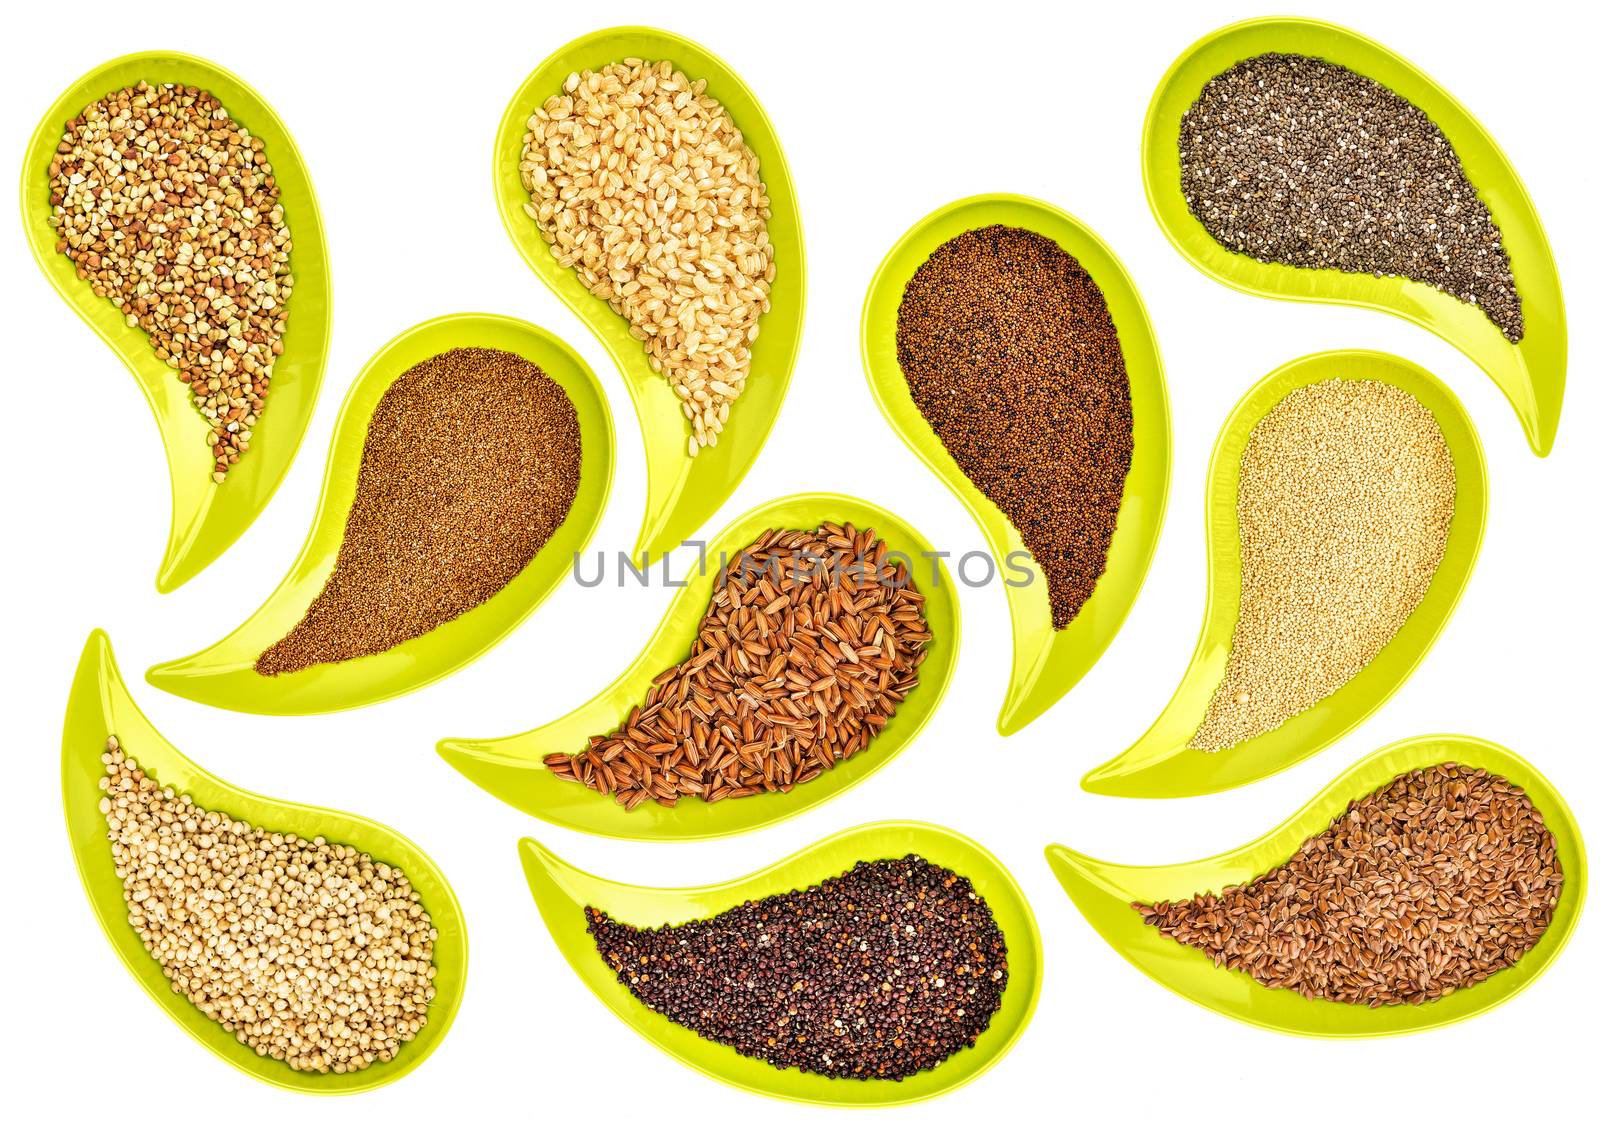 healthy, gluten free, grains and seeds (flax, chia, quinoa, kaniwa, sorghum, rice, buckwheat, amaranth, teff) - top view of teardrop shaped bowls on white background